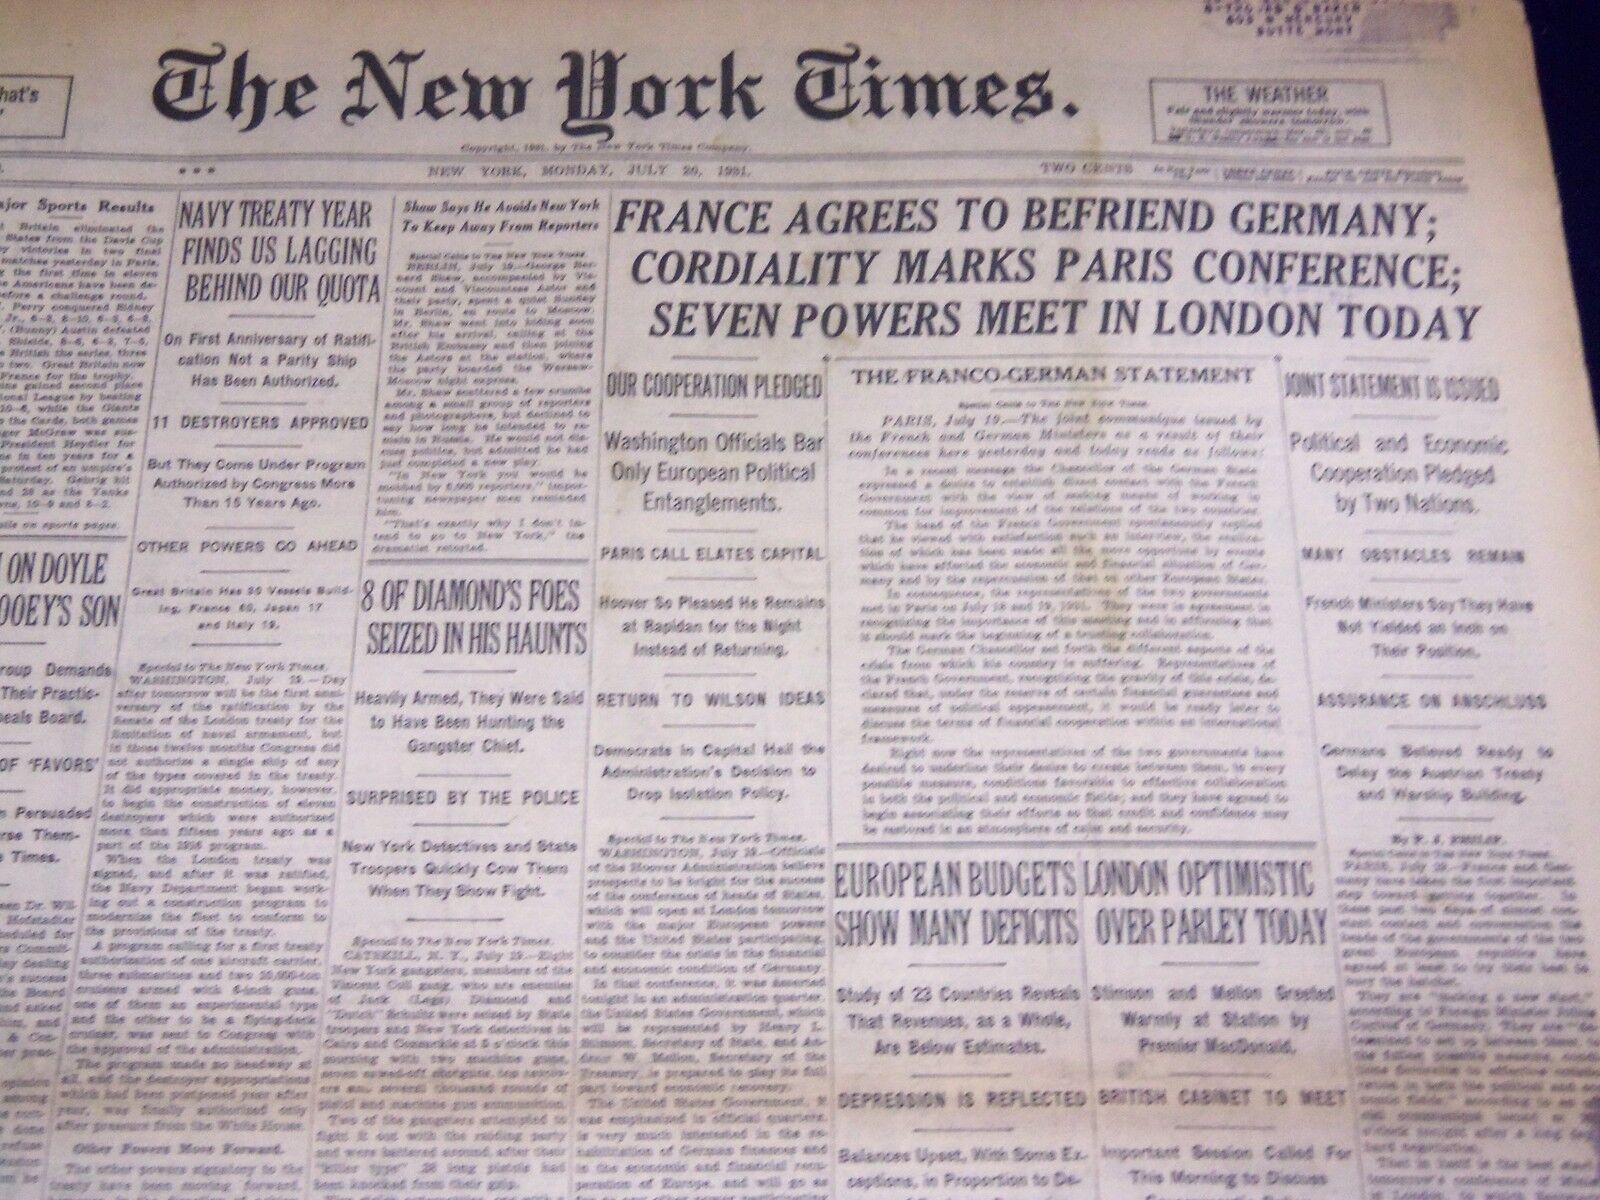 1931 JULY 20 NEW YORK TIMES - FRANCE AGREES TO BEFRIEND GERMANY - NT 2215